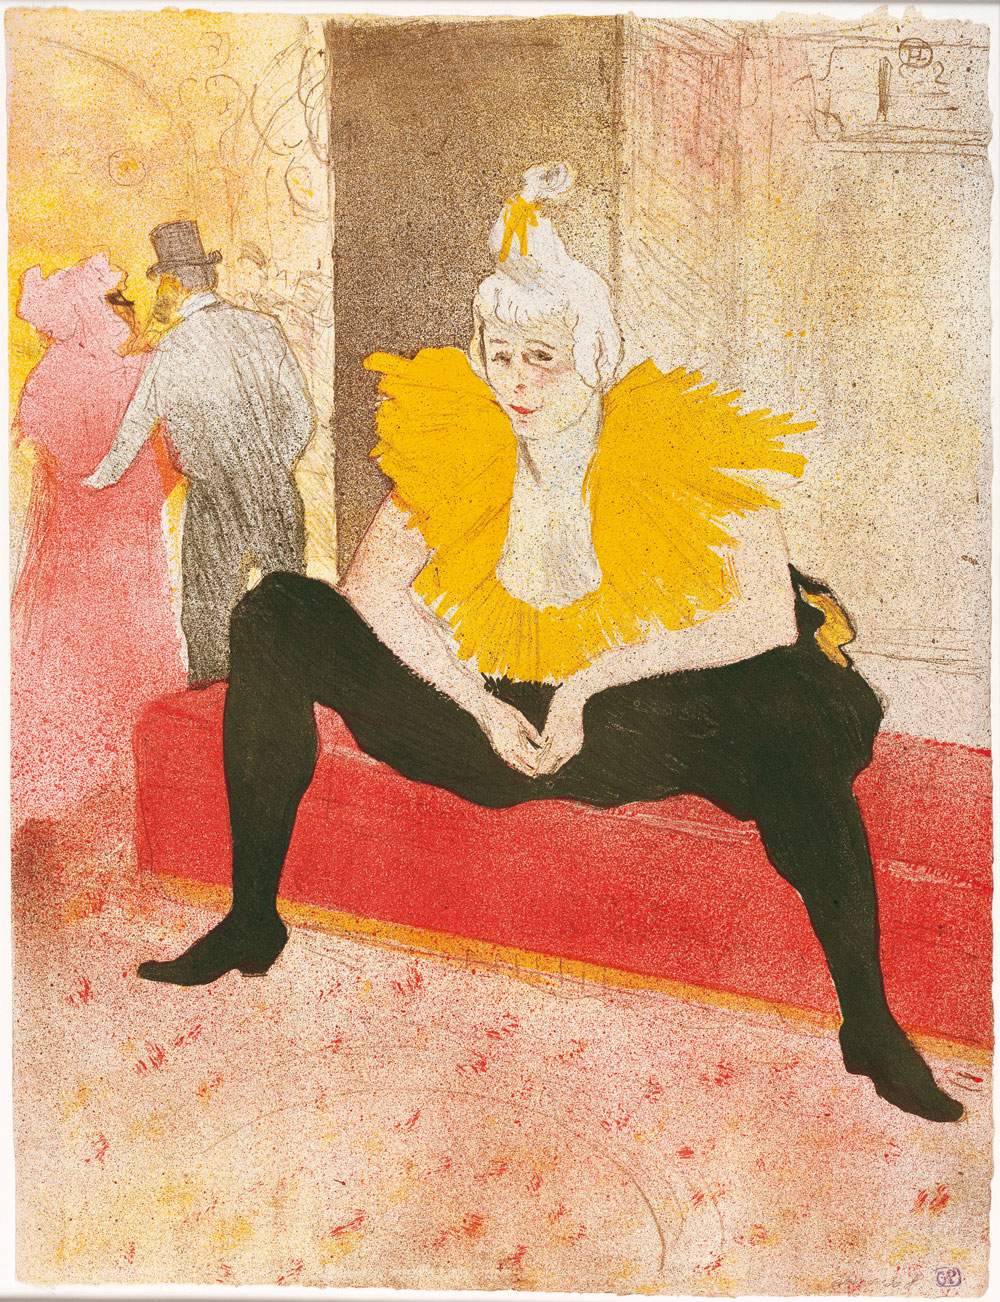 In October, Toulouse-Lautrec, The Fleeting World, will arrive at Milan's Palazzo Reale.